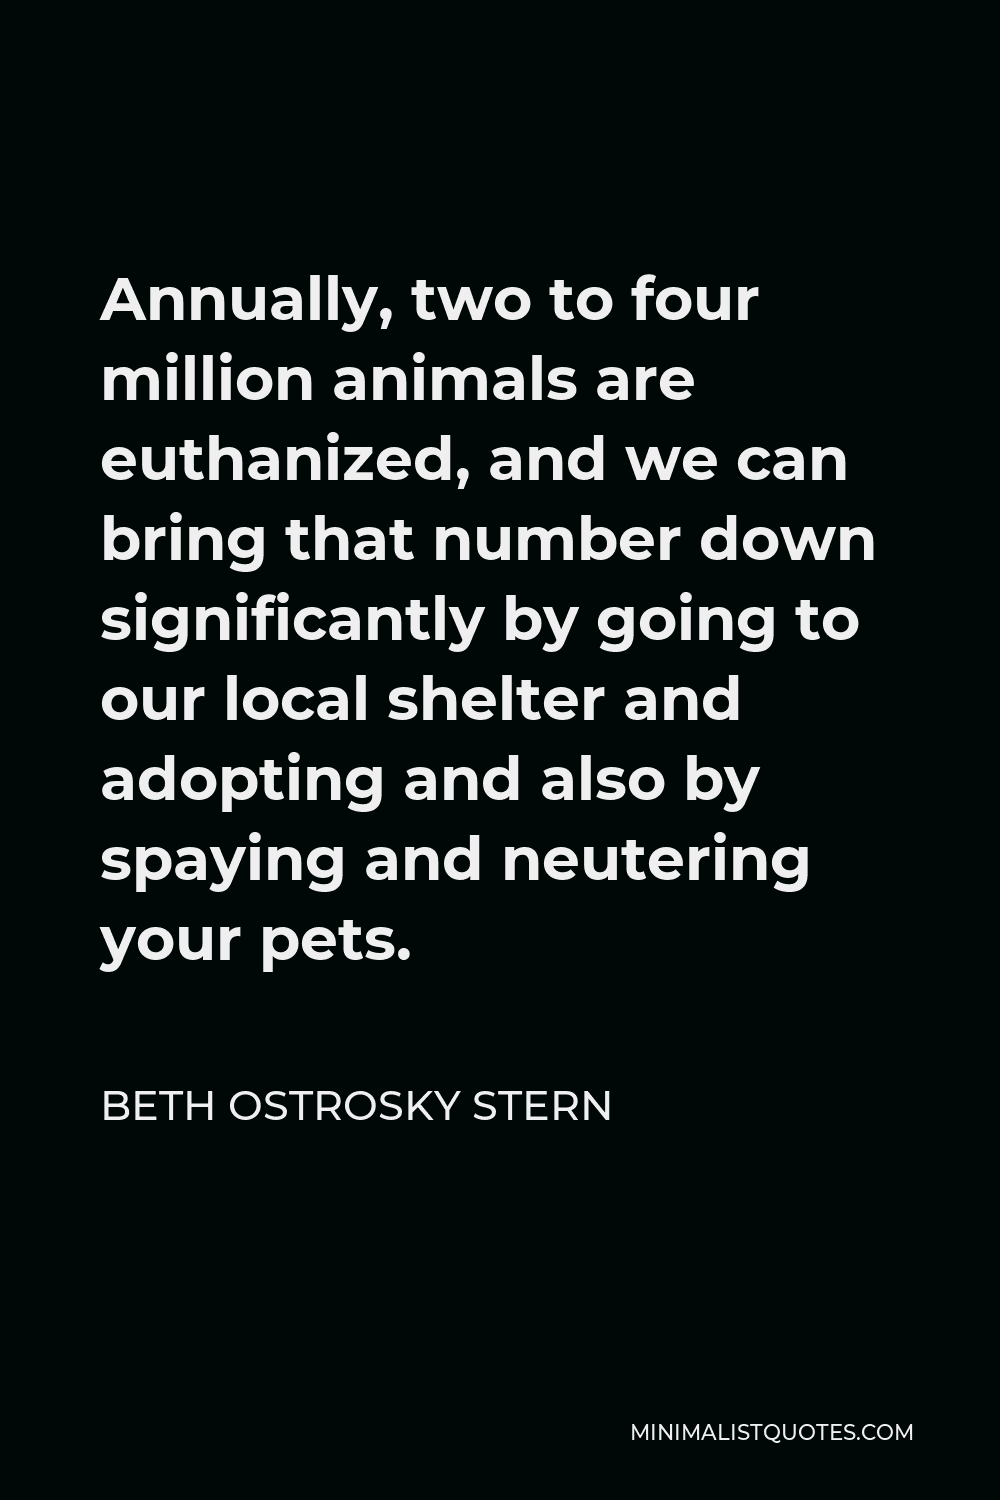 Beth Ostrosky Stern Quote - Annually, two to four million animals are euthanized, and we can bring that number down significantly by going to our local shelter and adopting and also by spaying and neutering your pets.